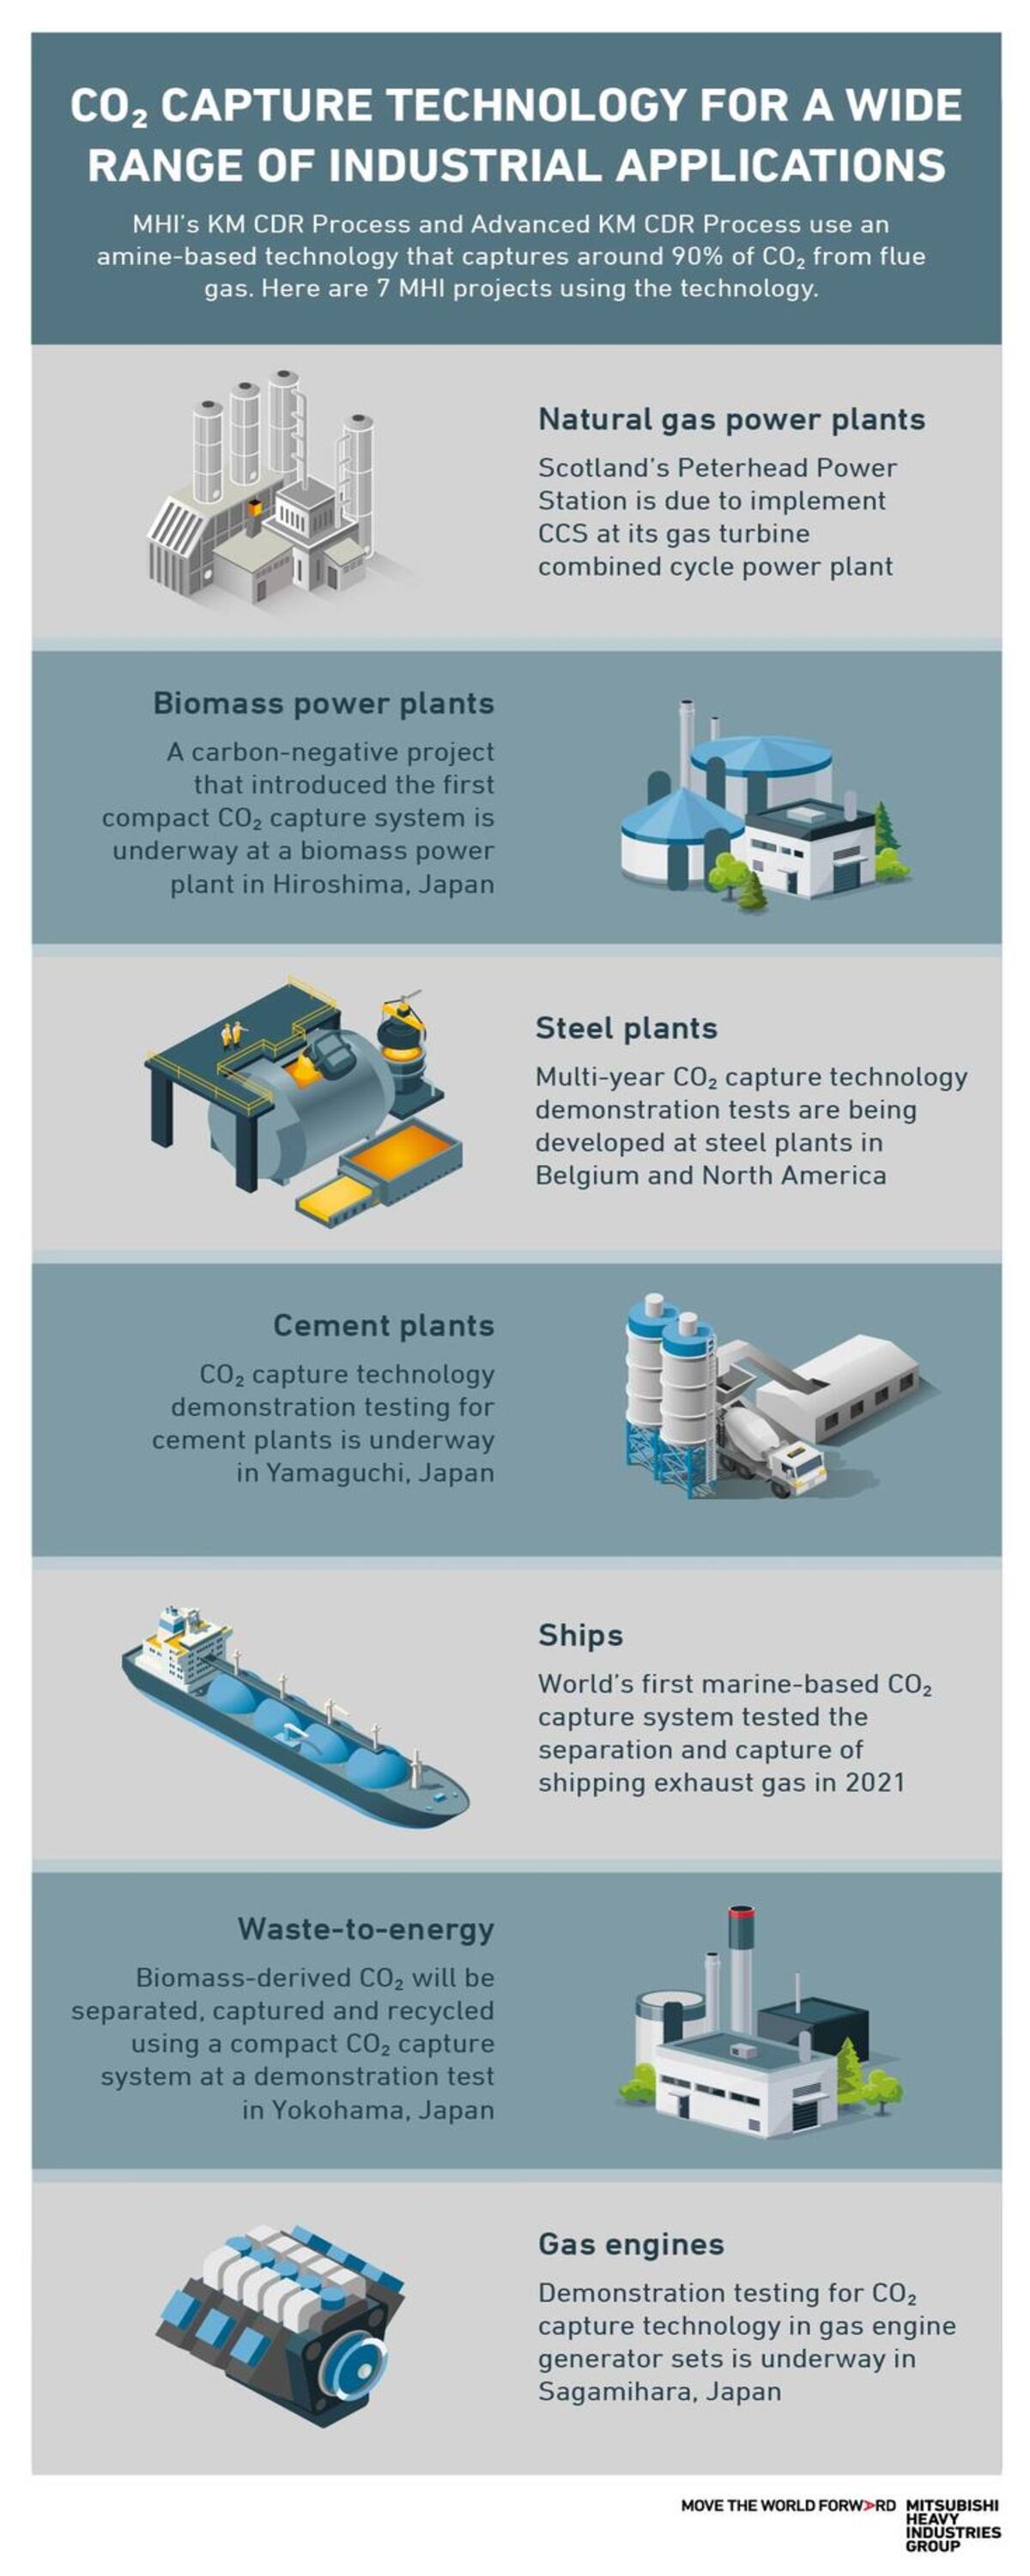 From ships to cement plants, CO₂ capture technology can be utilized across numerous industries